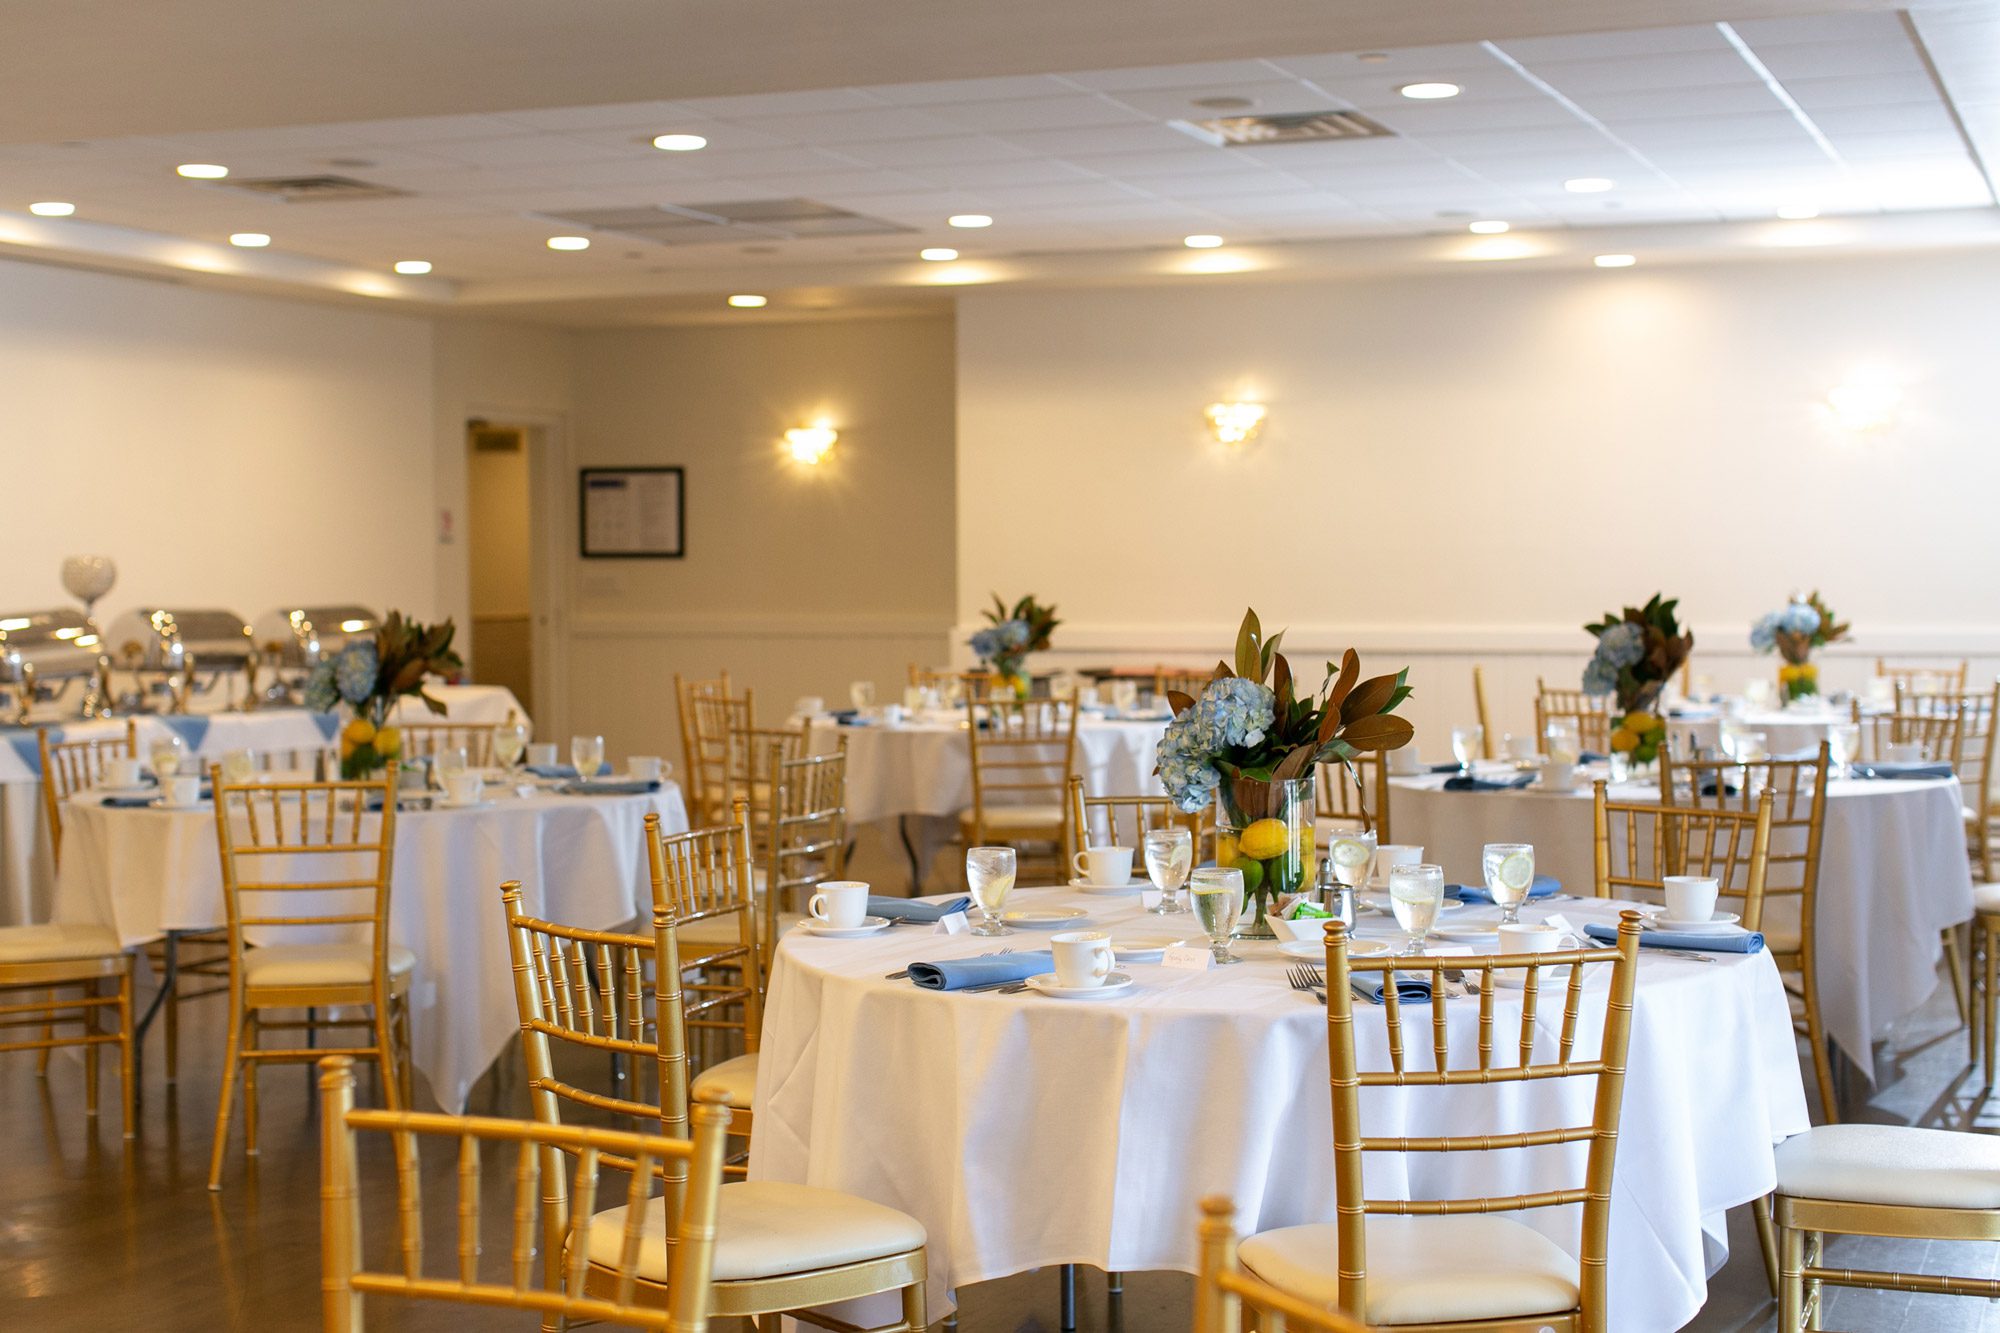 The Waterfront Room at Danversport decorated for a bridal shower.